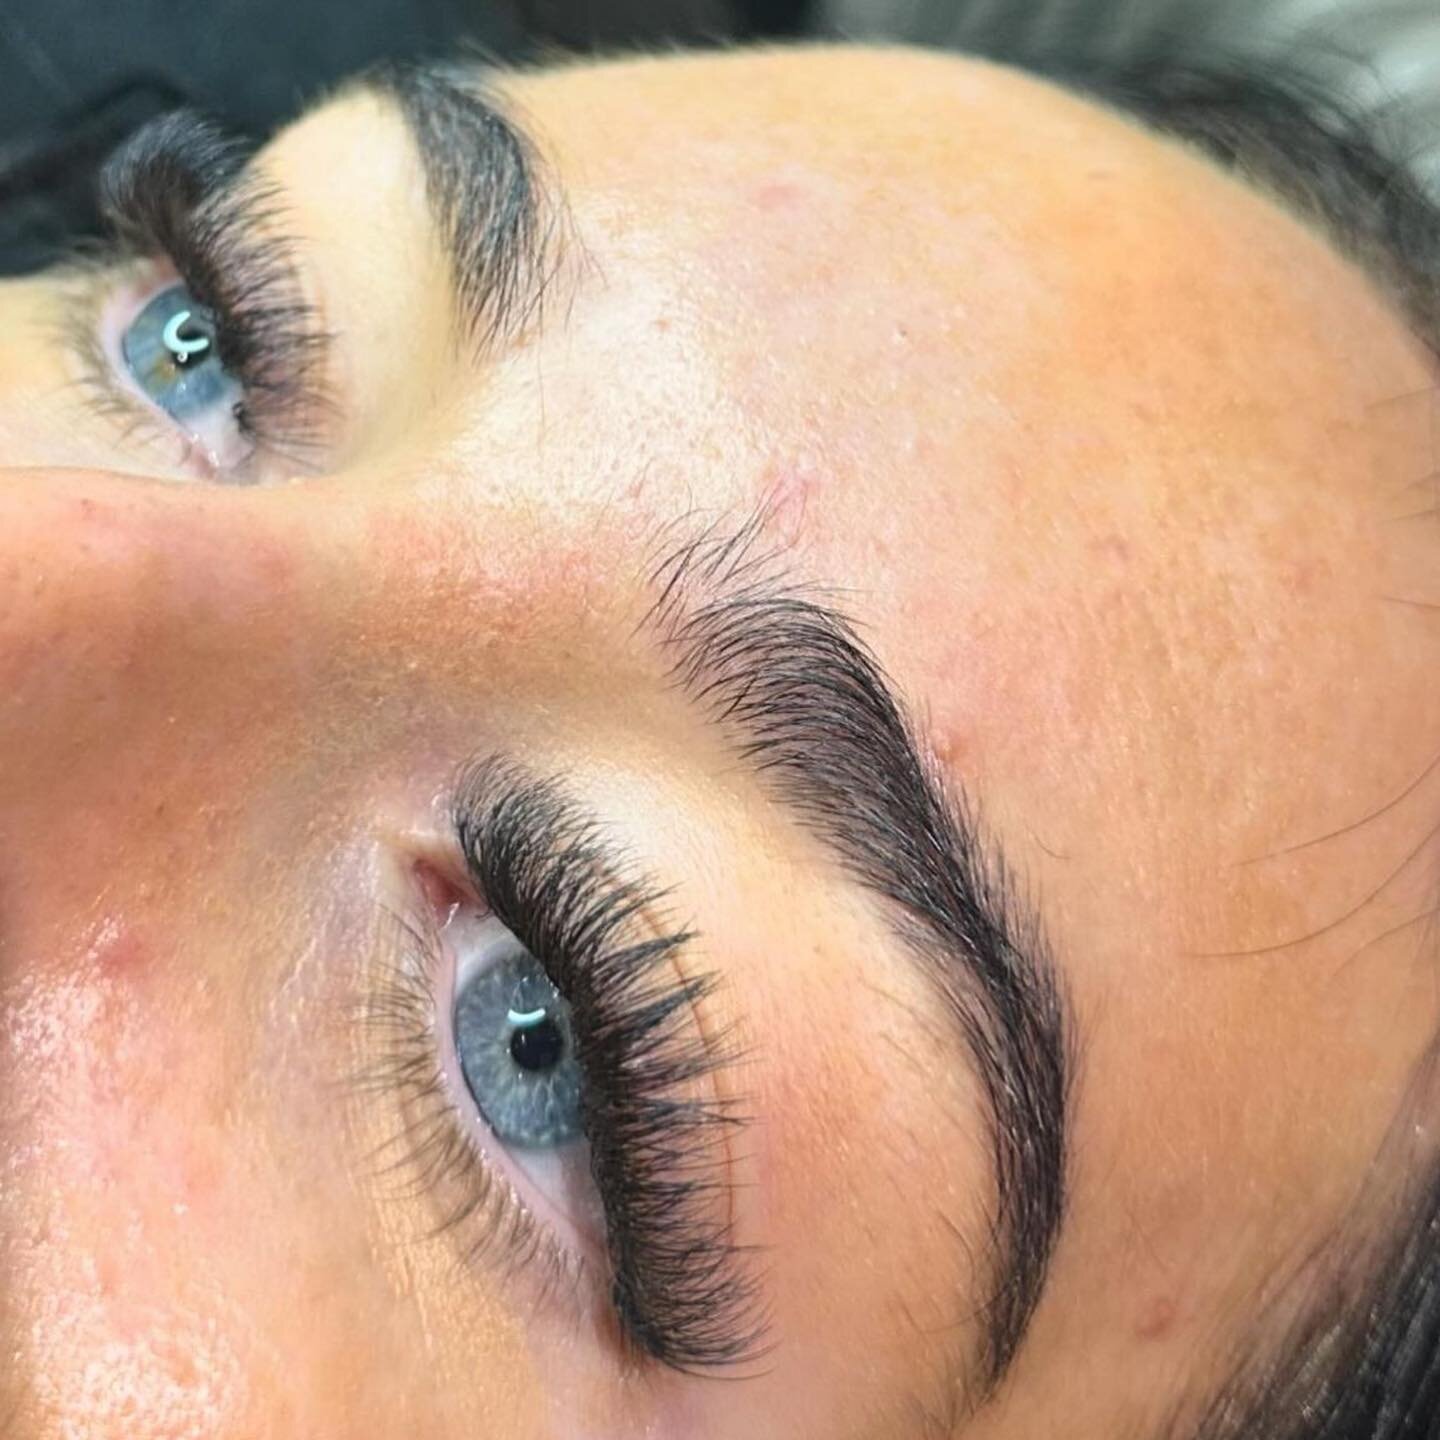 Our very own lash queen @lasheslou based at the salon 👀 

Monday - Saturday, message direct to book 🤍 

#lashes #hairsalon #lasheslasheslashes #eastbournesalon #beautysalon #hairsalon #salon #beauty #lash #girls